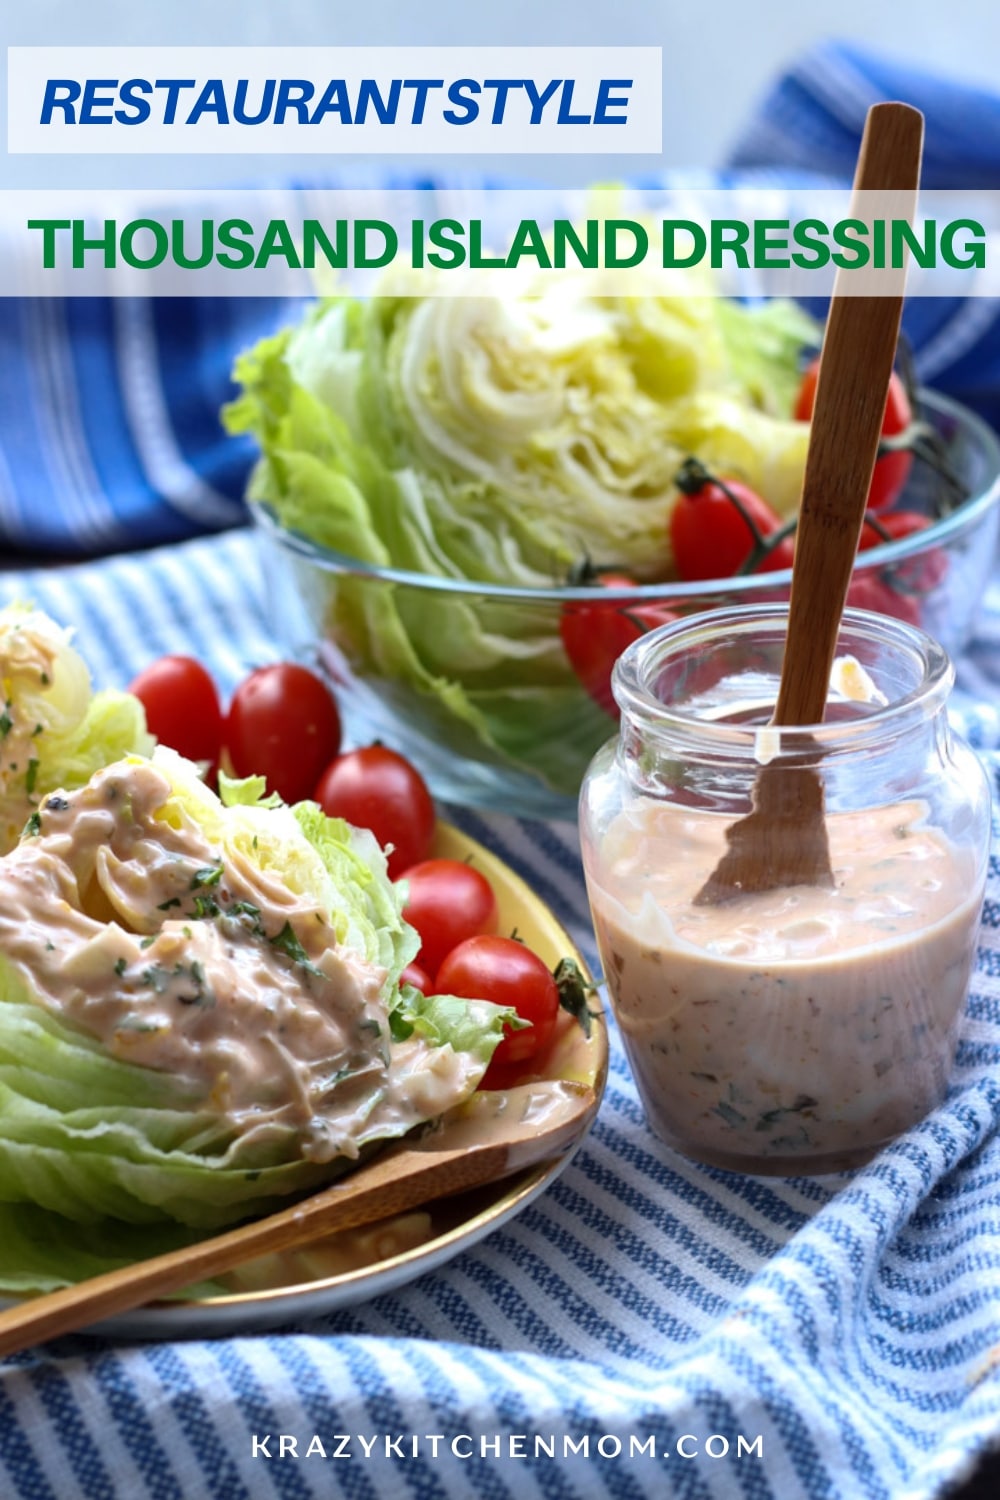 This dressing can be made in advance and will stay good in the refrigerator for 1 week. Store it in an airtight container. 
My favorite airtight containers for homemade salad dressings are small mason jars with lids. They also make a great shaker for mixing vinaigrettes.
I like to garnish the wedge salad shown in the photos with crumpled bacon and onion straws. via @krazykitchenmom